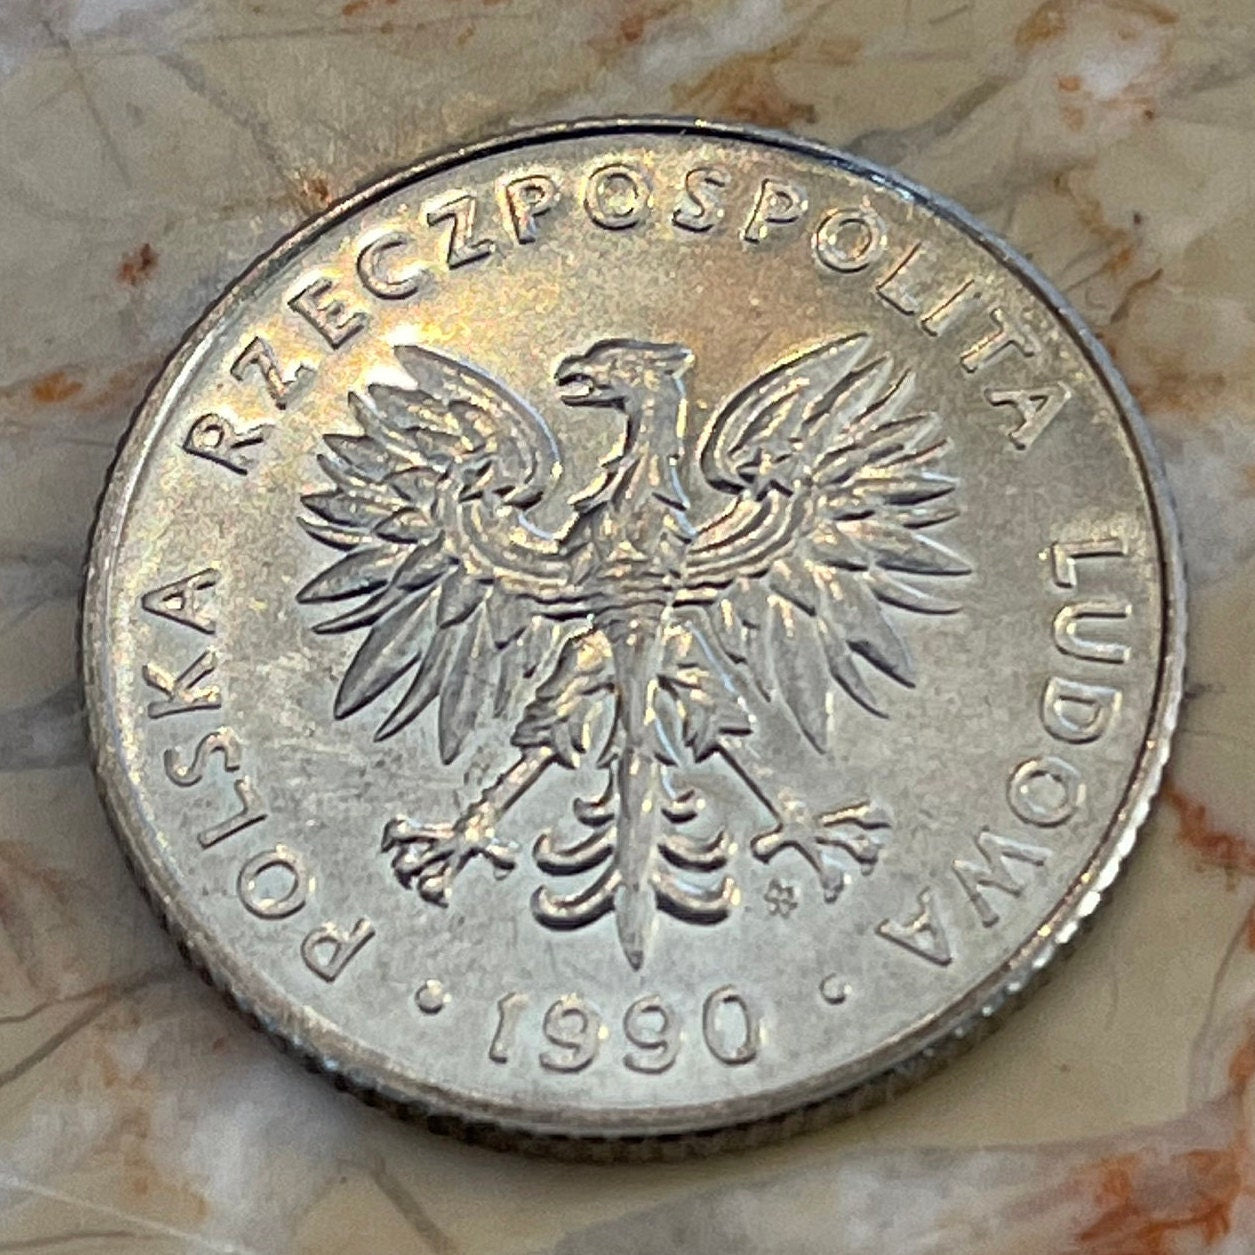 White Eagle 20 Zlotych Poland Authentic Coin Money for Jewelry and Craft Making